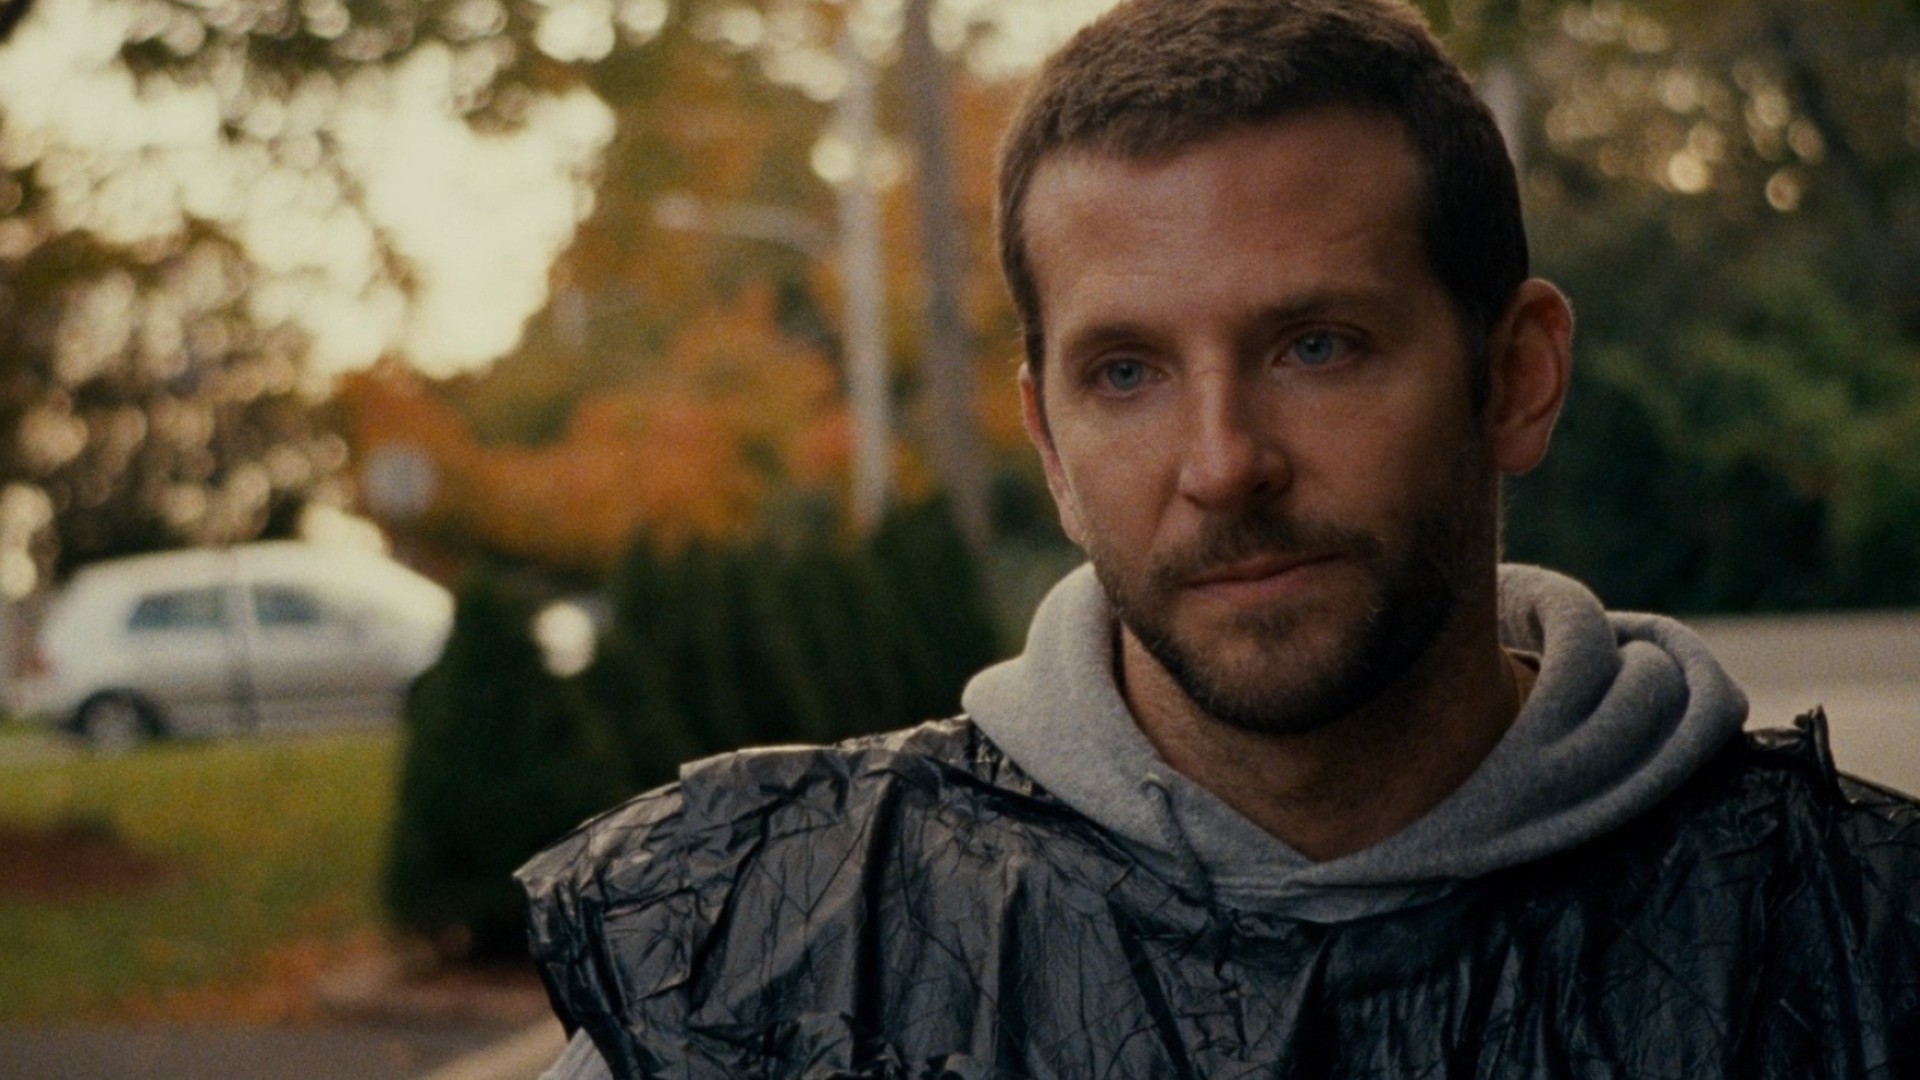 Silver Linings Playbook, Remastered 1080p version, High-definition audio, Enhanced movie experience, 1920x1080 Full HD Desktop